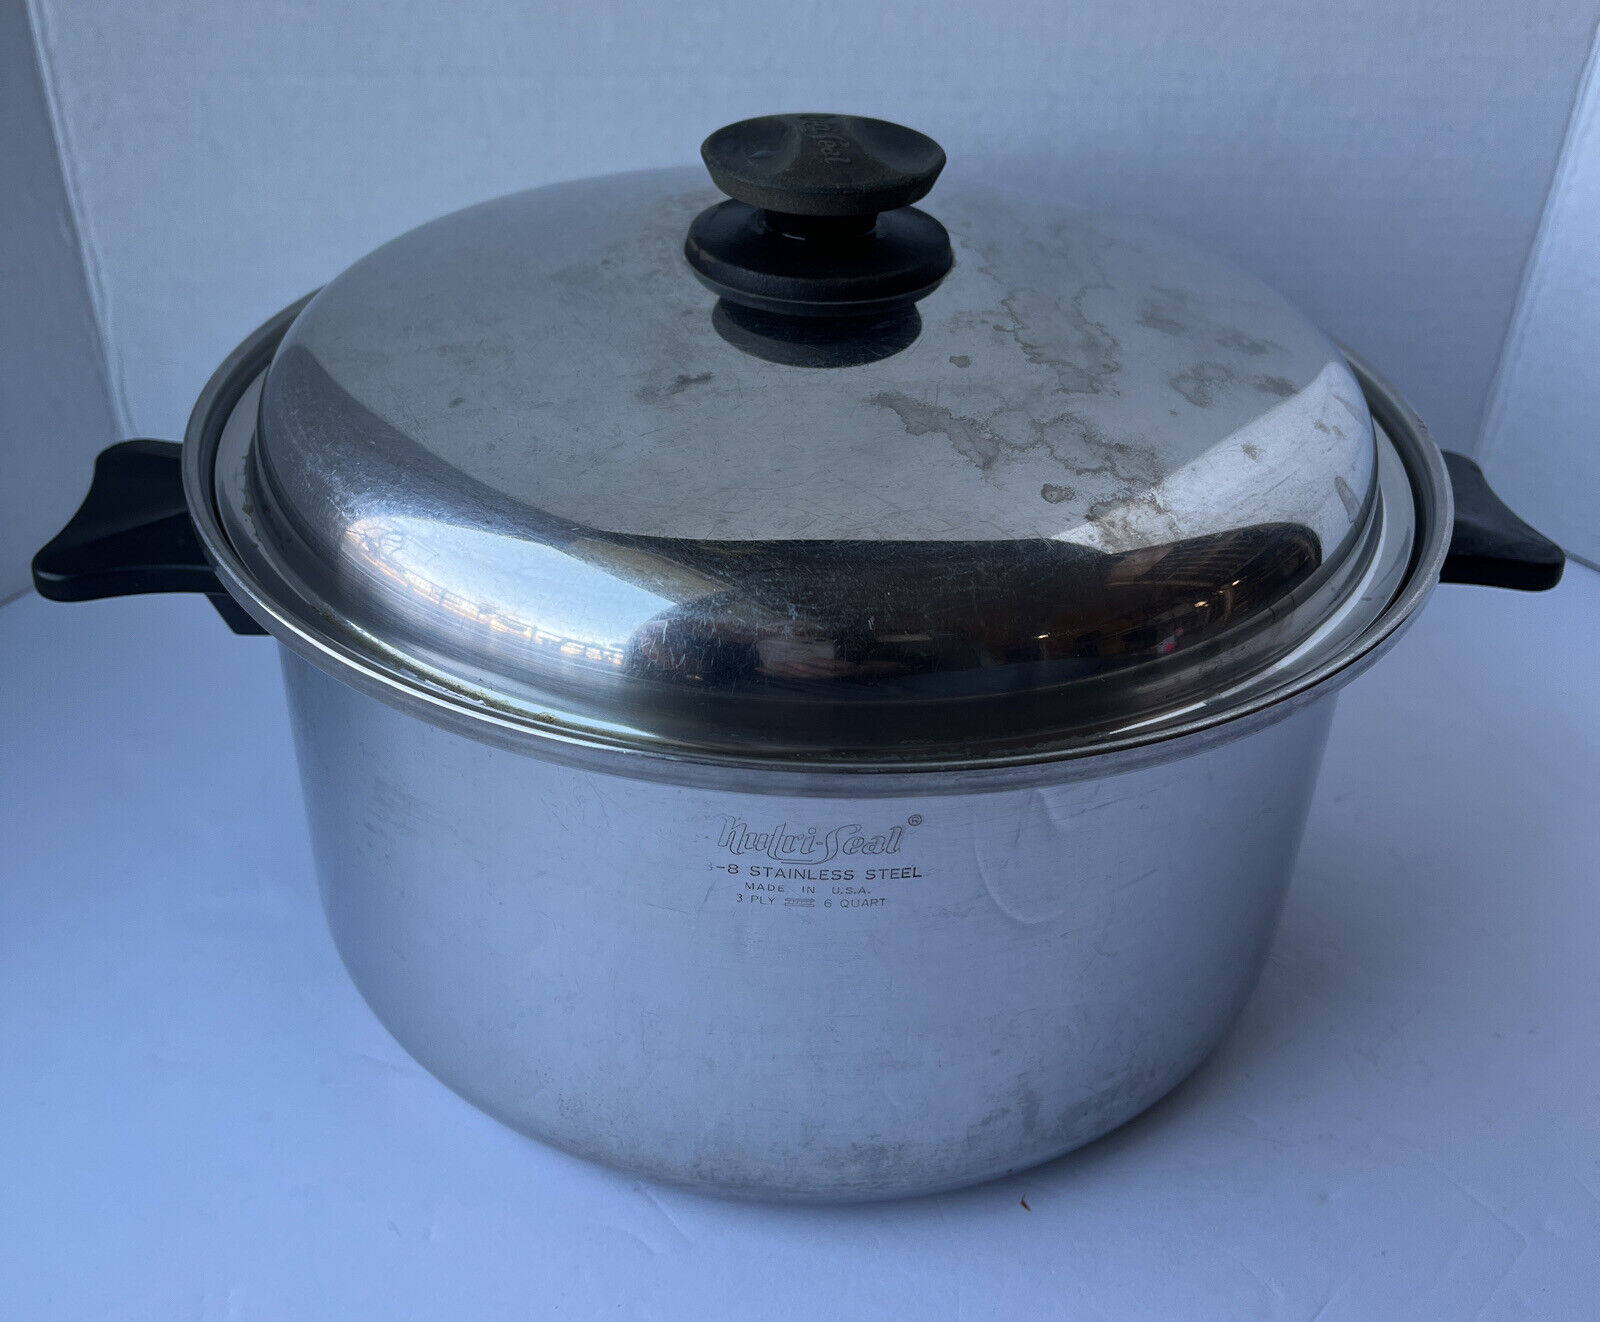 Nutri-Seal 18-8 3 Ply Stainless Steel Stock Pot 6 QT Made In USA Broken Handle